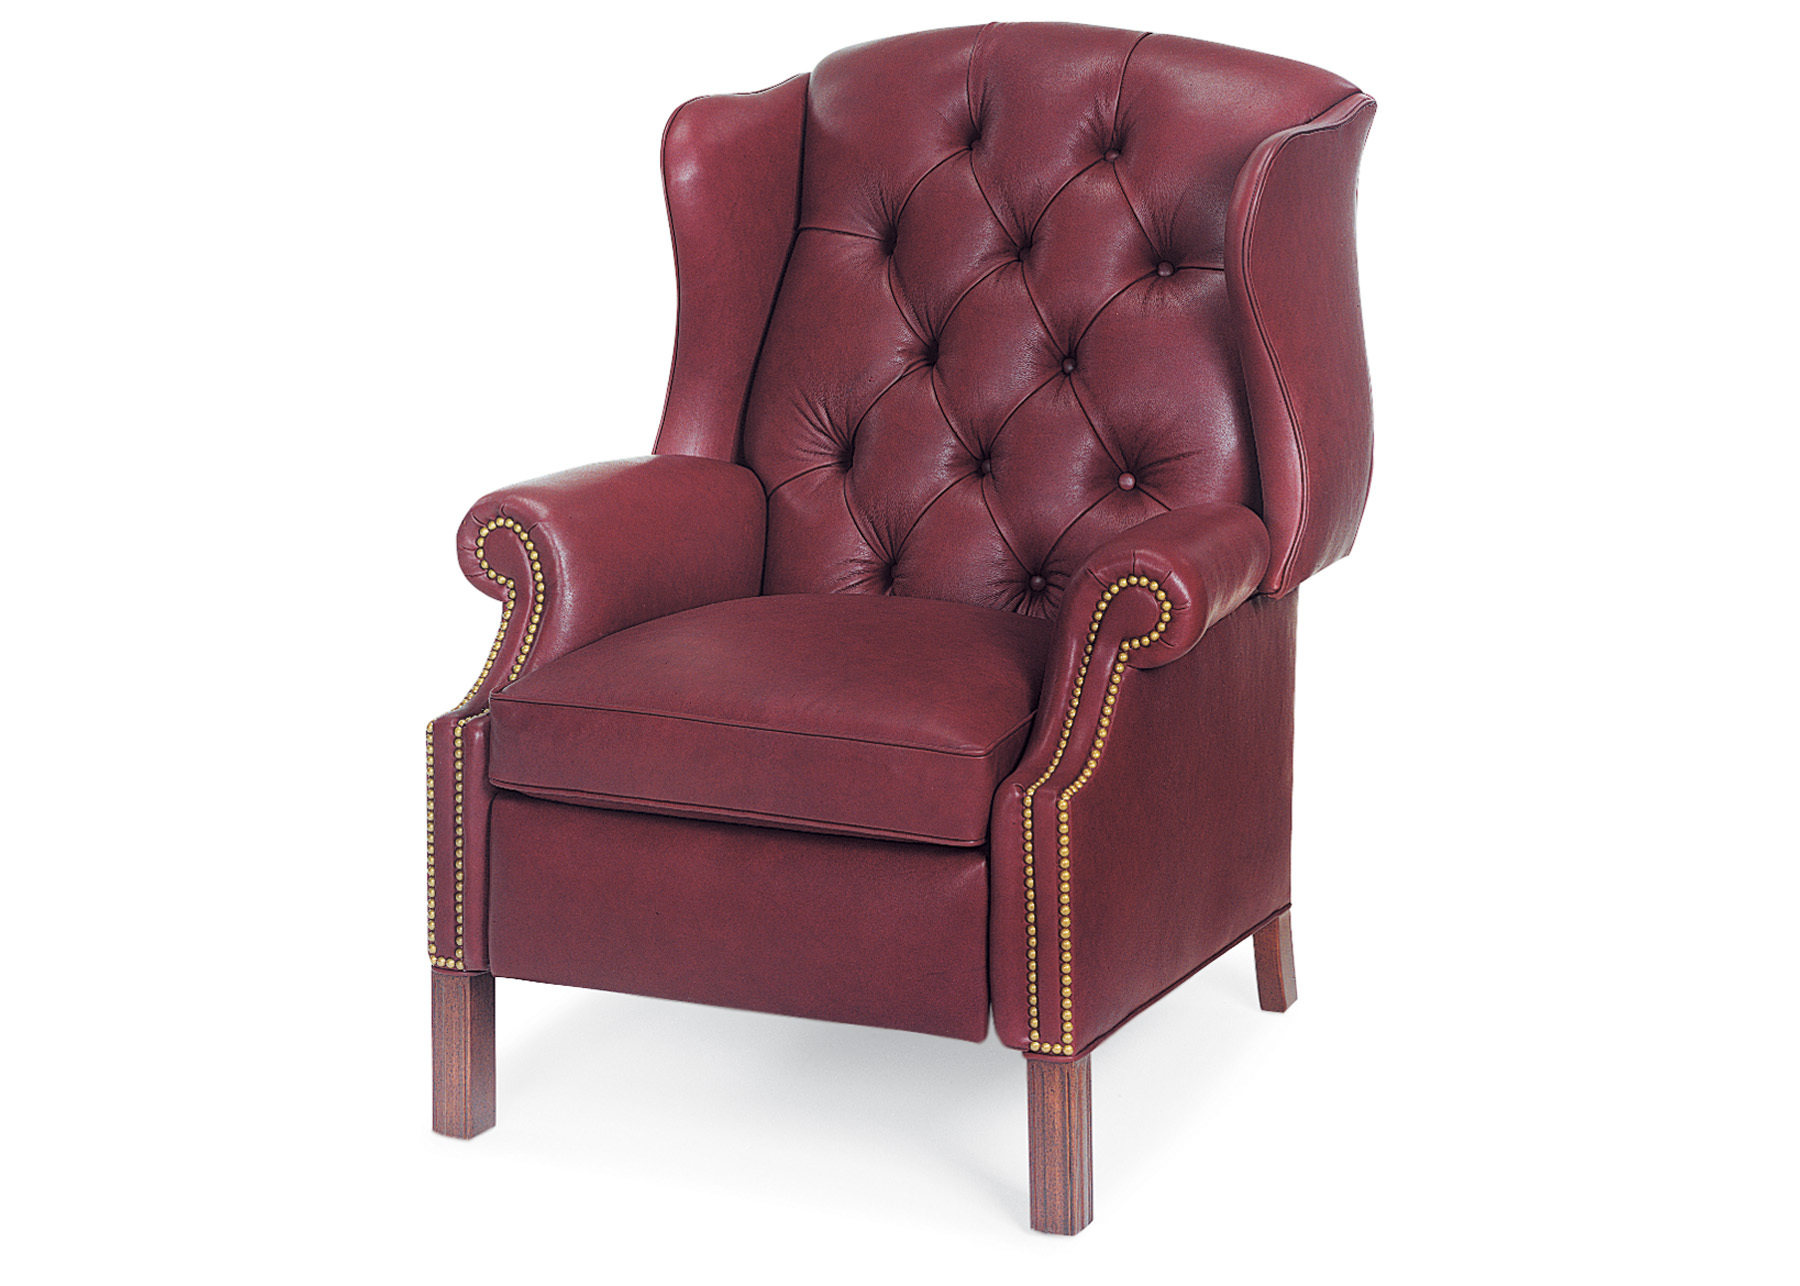 BROWNING TUFTED WING CHAIR POWER RECLINER